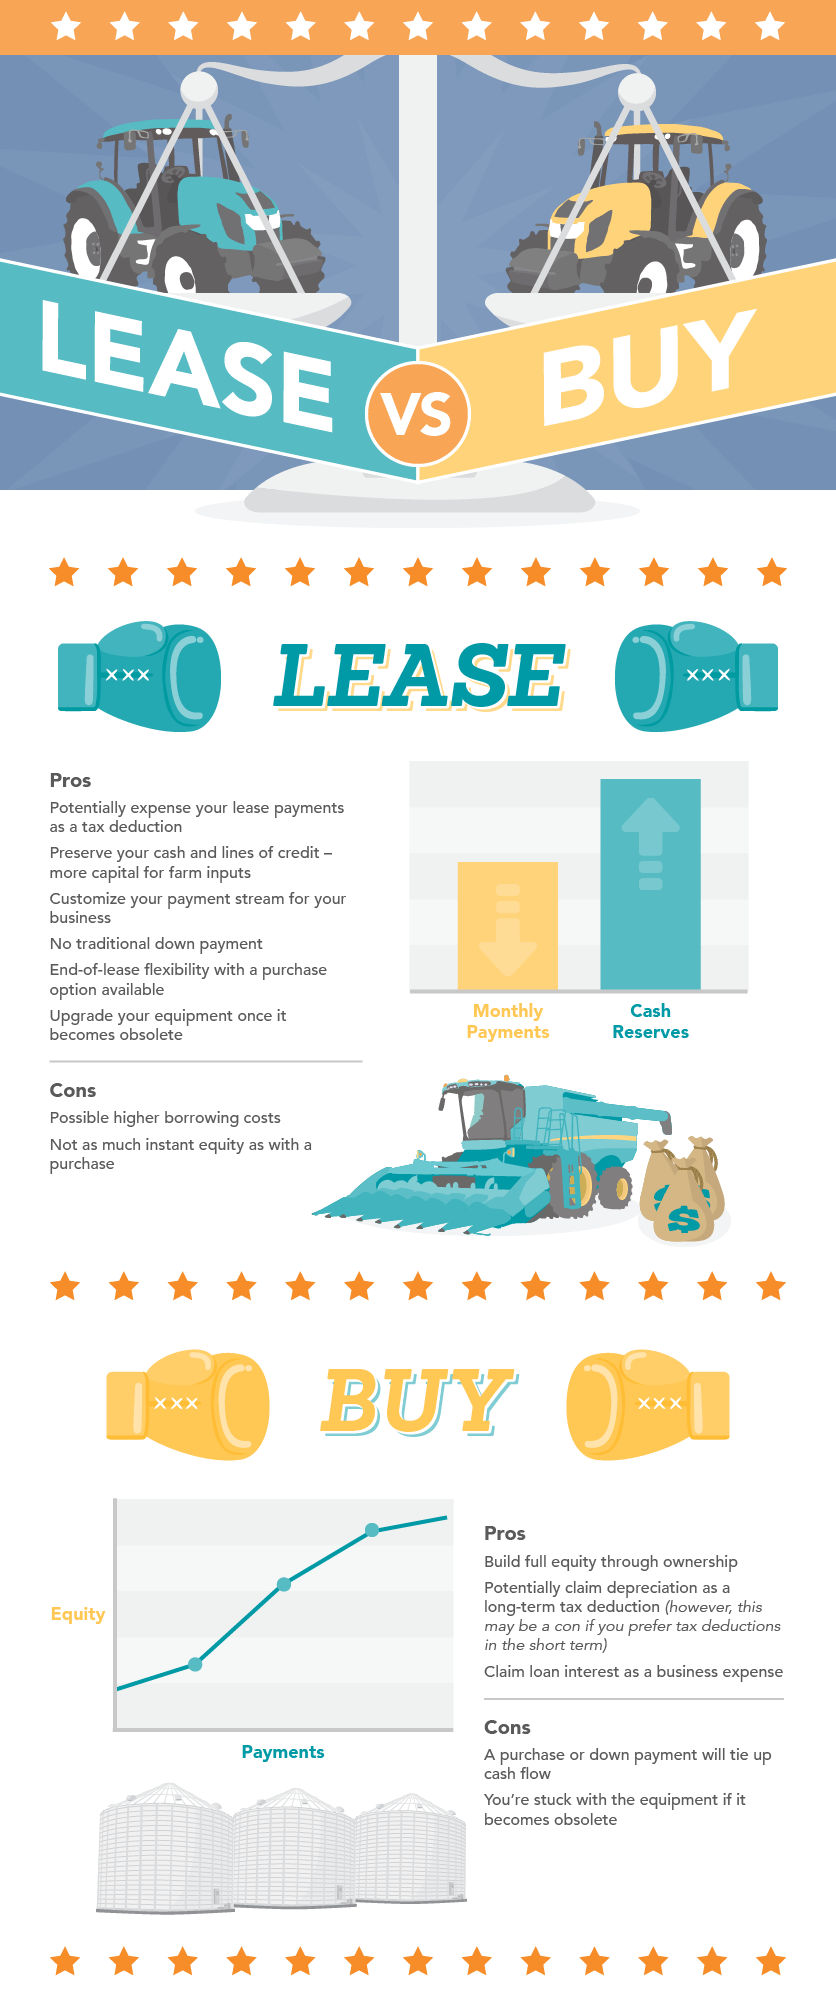 CWB National Leasing's lease vs. buy infographic that outlines the pros and cons of each acquisition choice